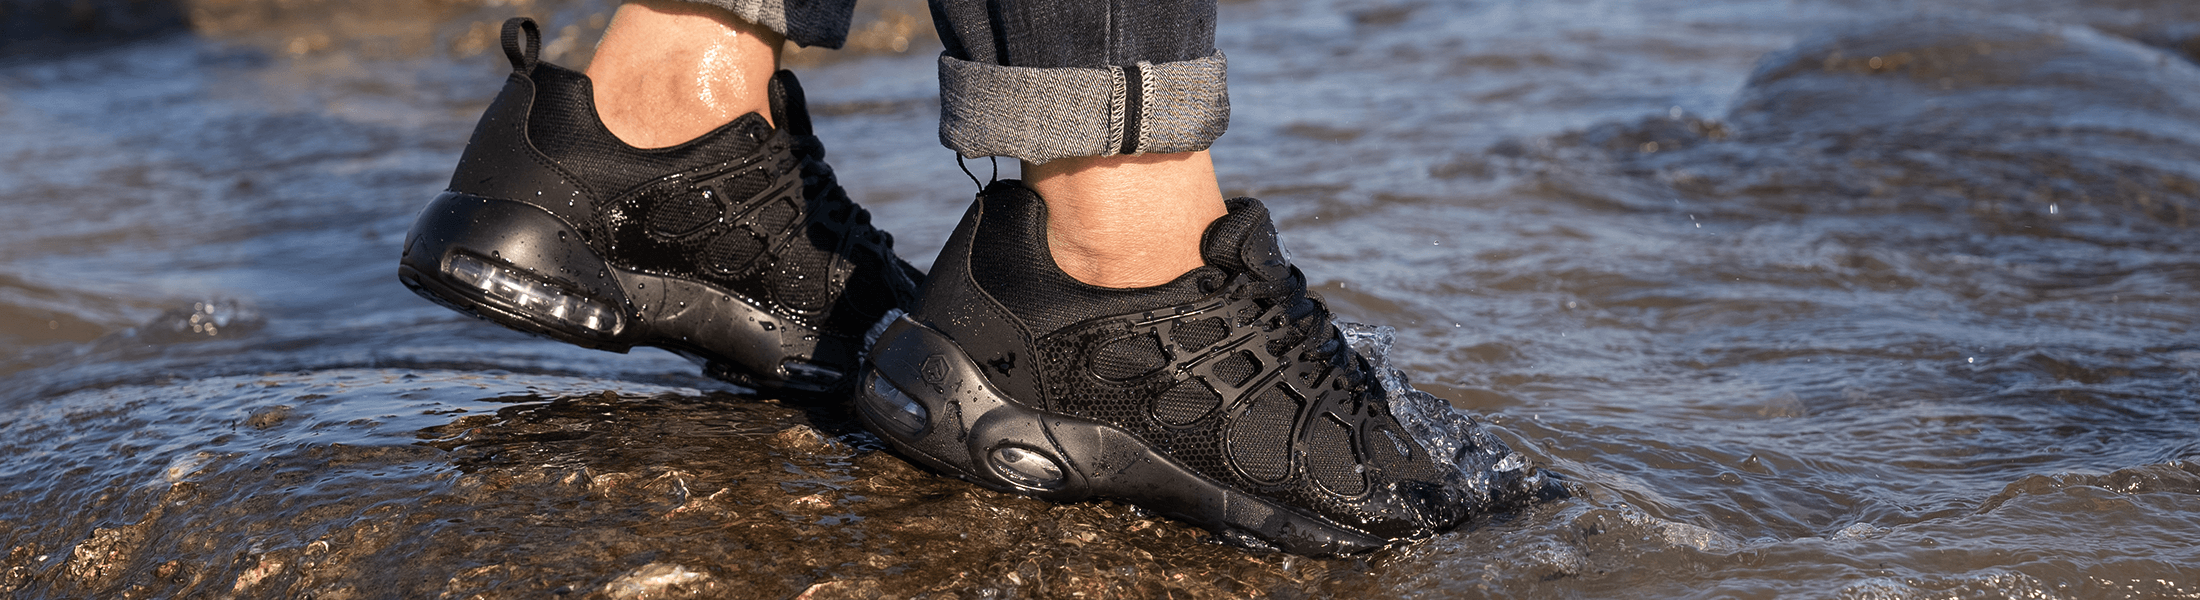 Men's Waterproof Work Shoes and Boots